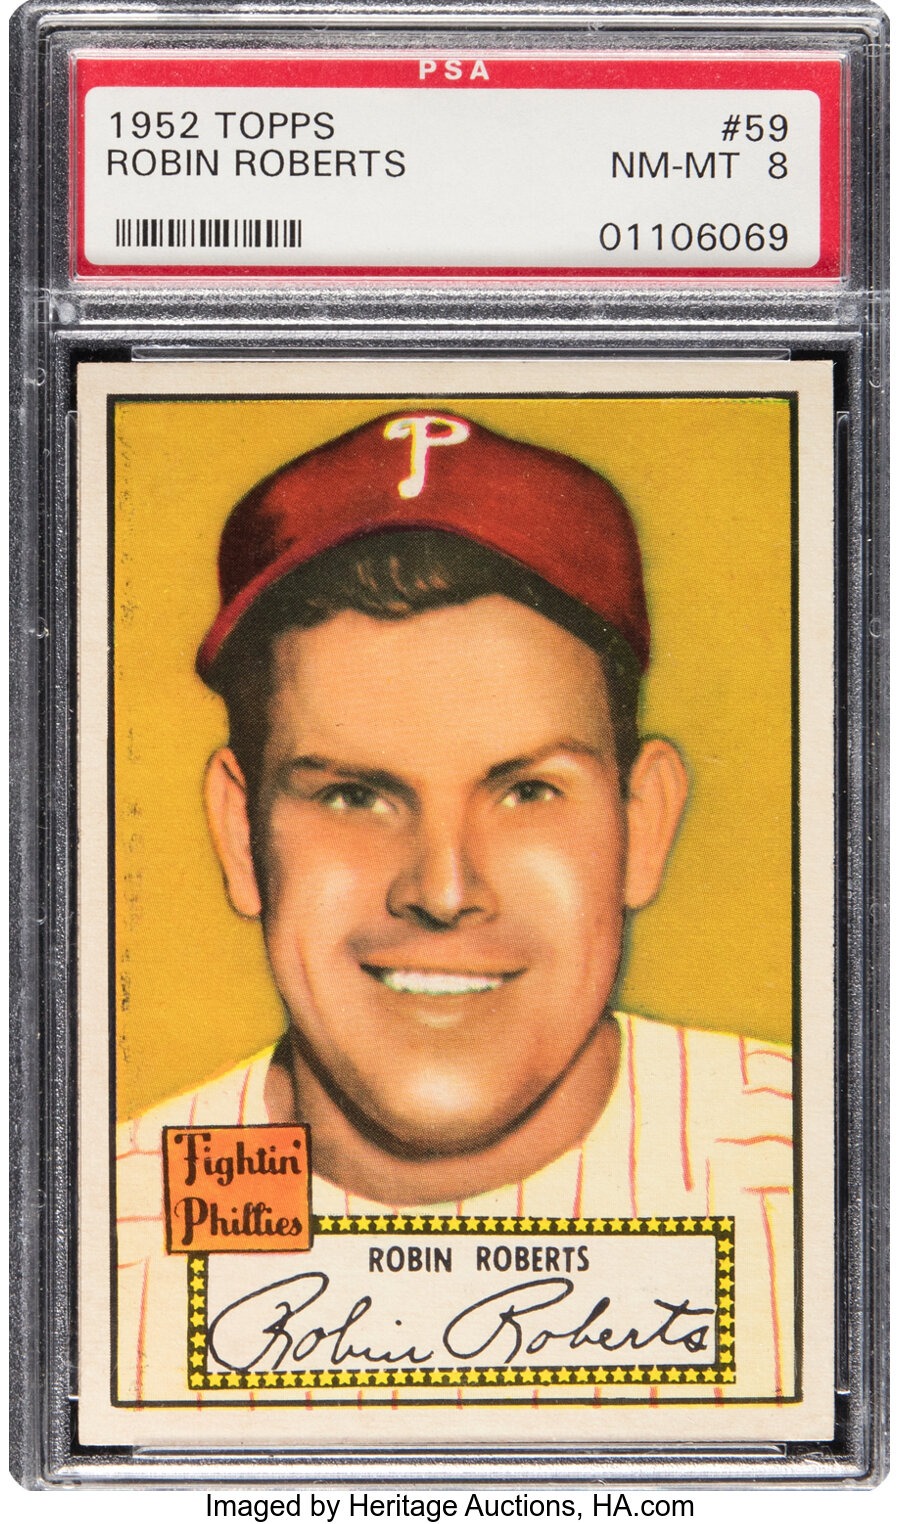 1952 Topps Robin Roberts #59 PSA NM-MT 8 - Only One Higher!